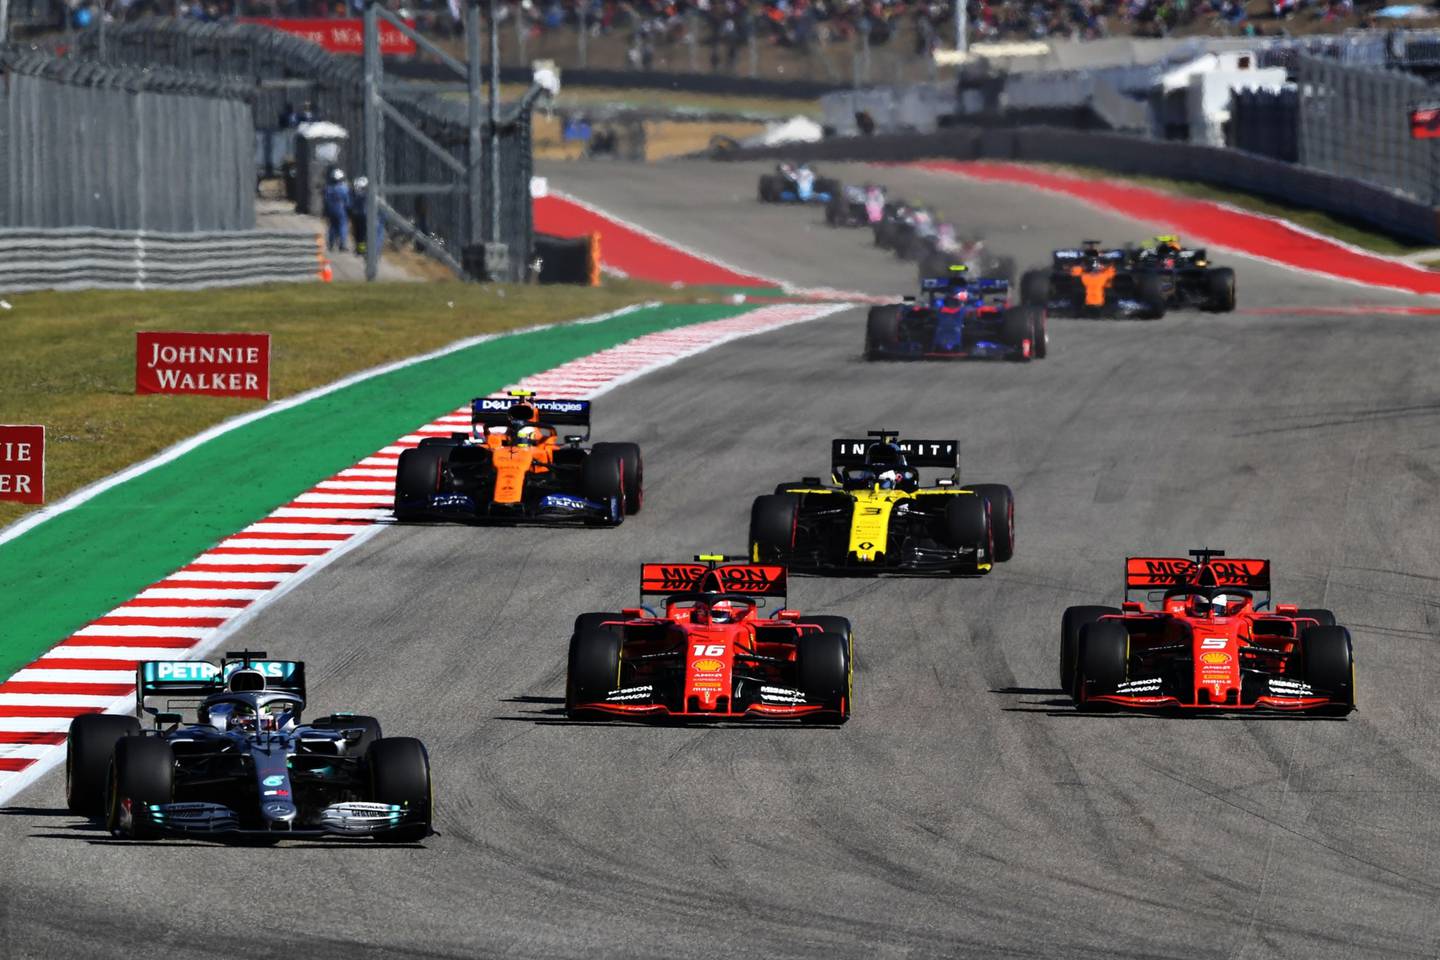 Drivers at the F1 Grand Prix of USA at Circuit of The Americas on November 03, 2019 in Austin, Texas.